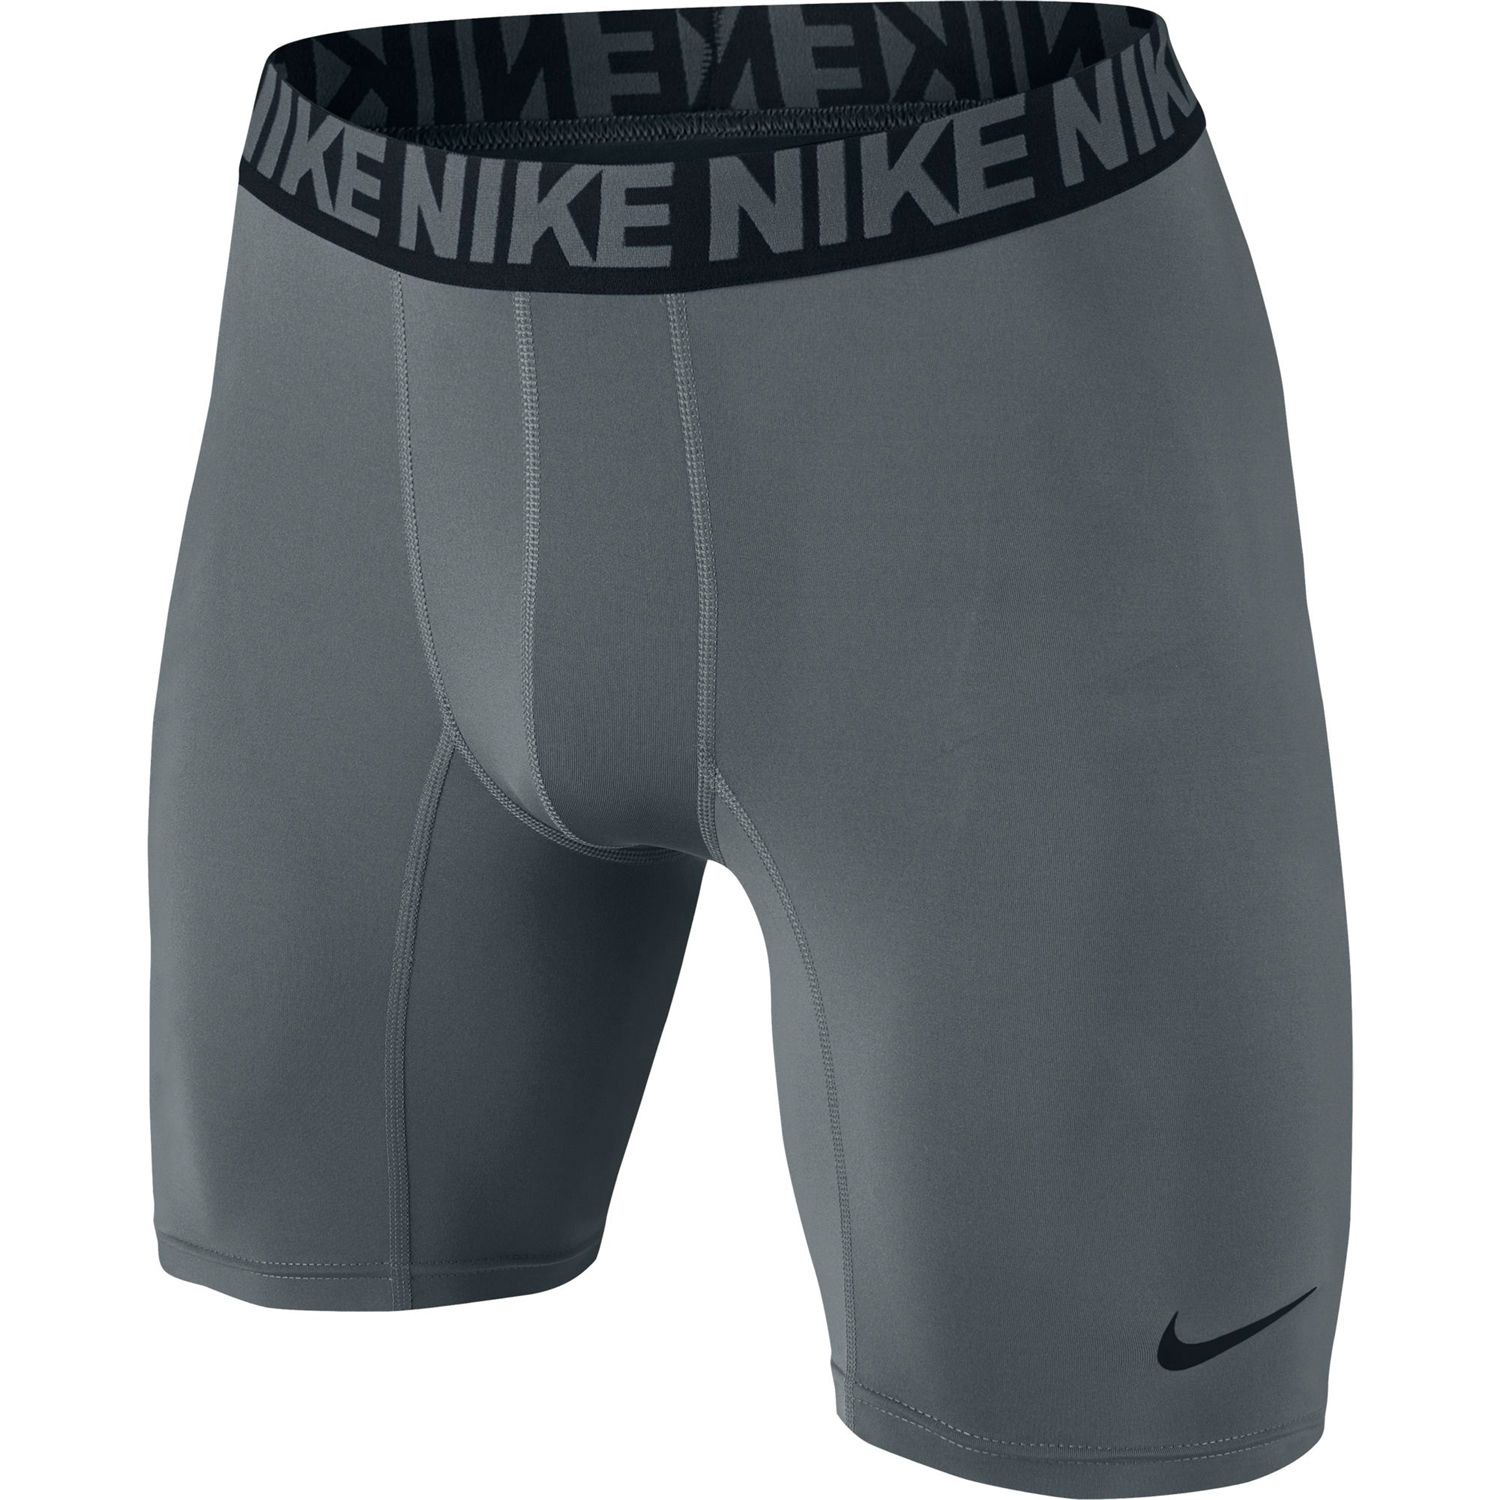 nike pro boxer briefs,Save up to 17%,www.ilcascinone.com